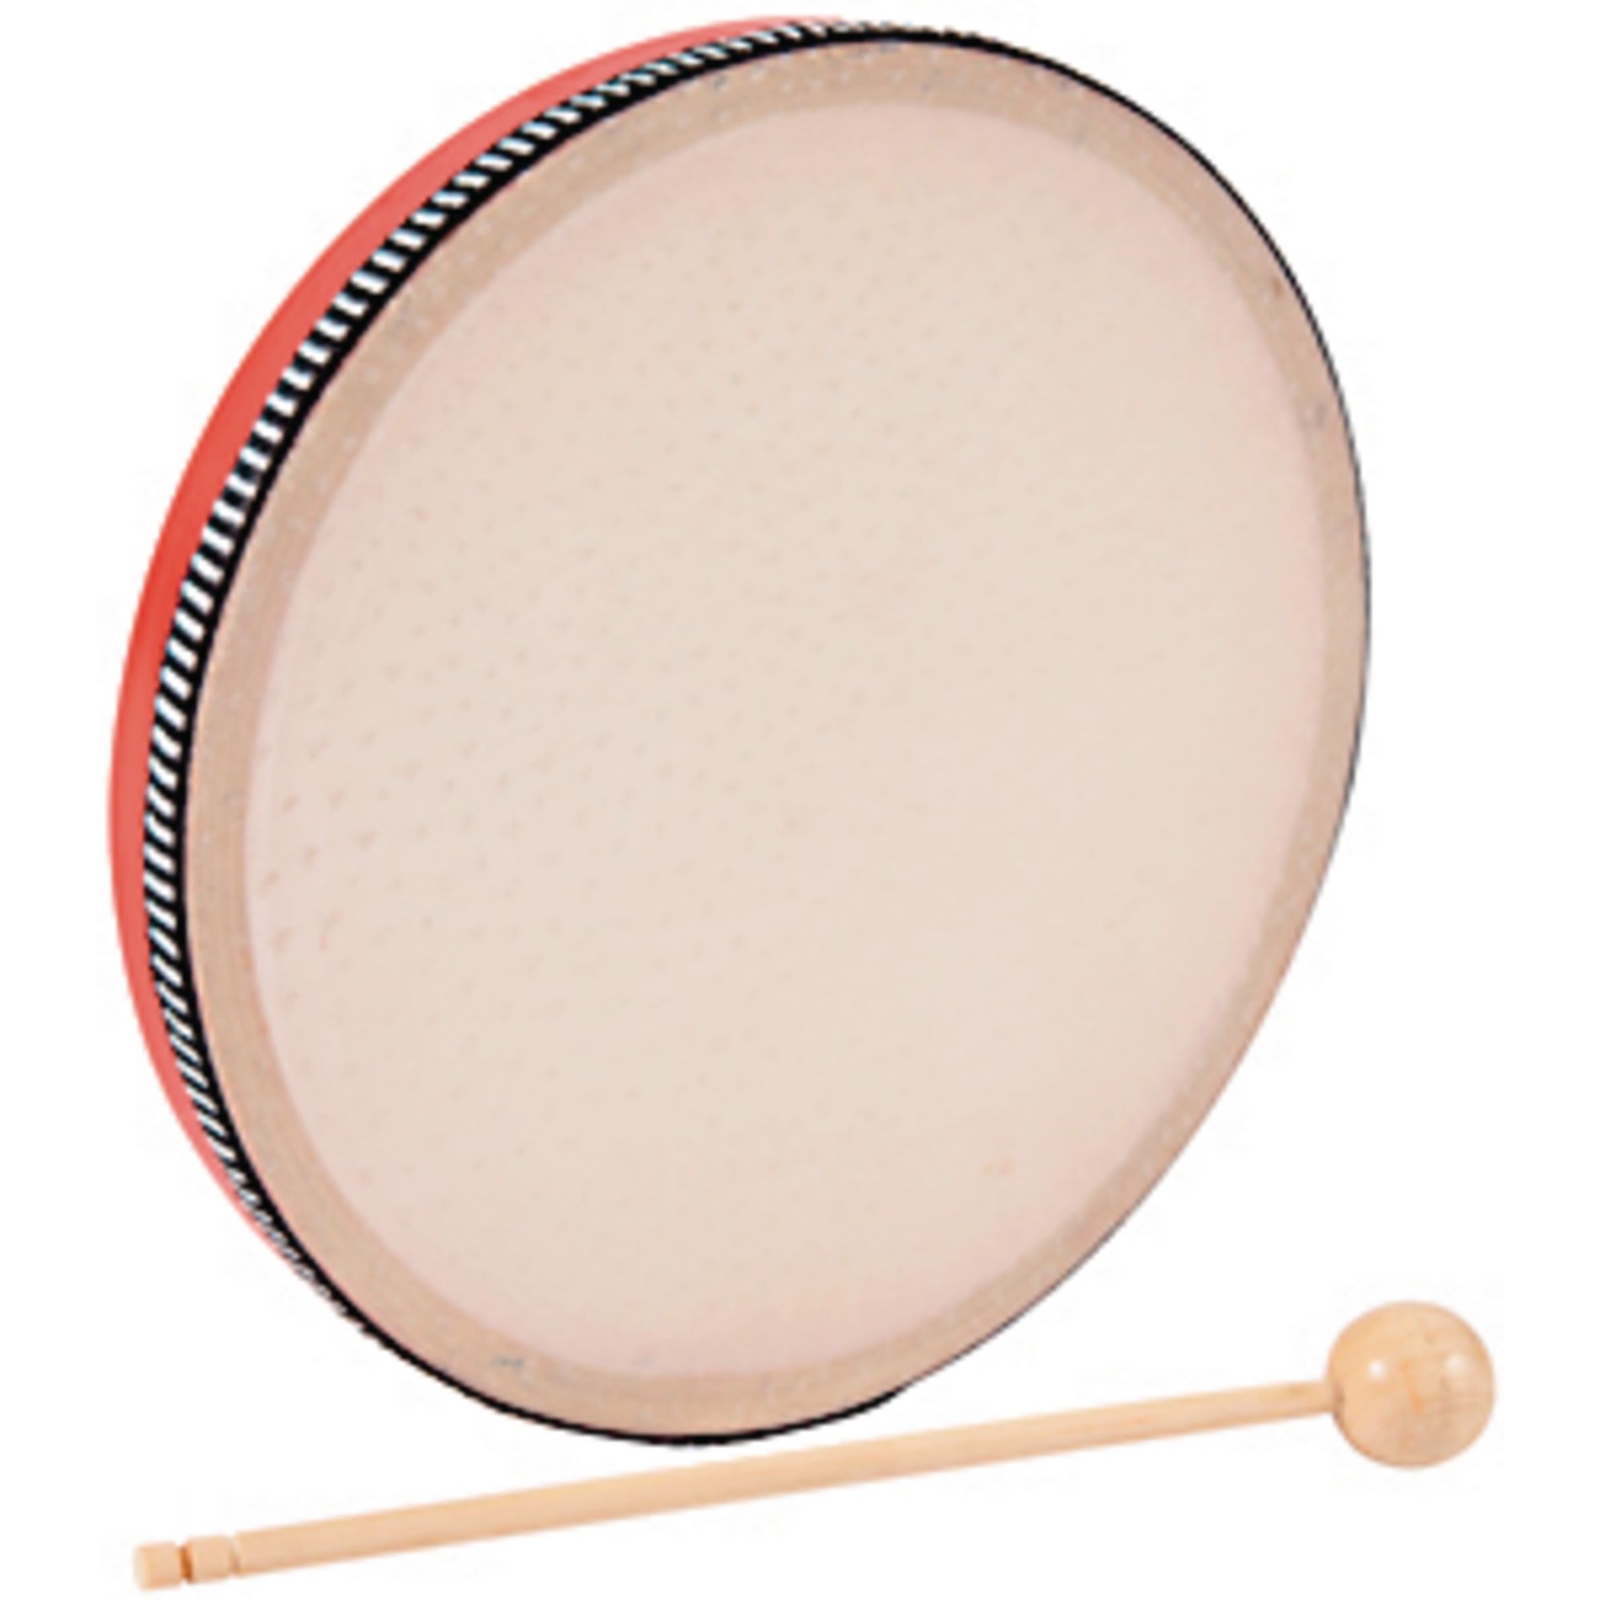 Hand Drum and Beater - Wood